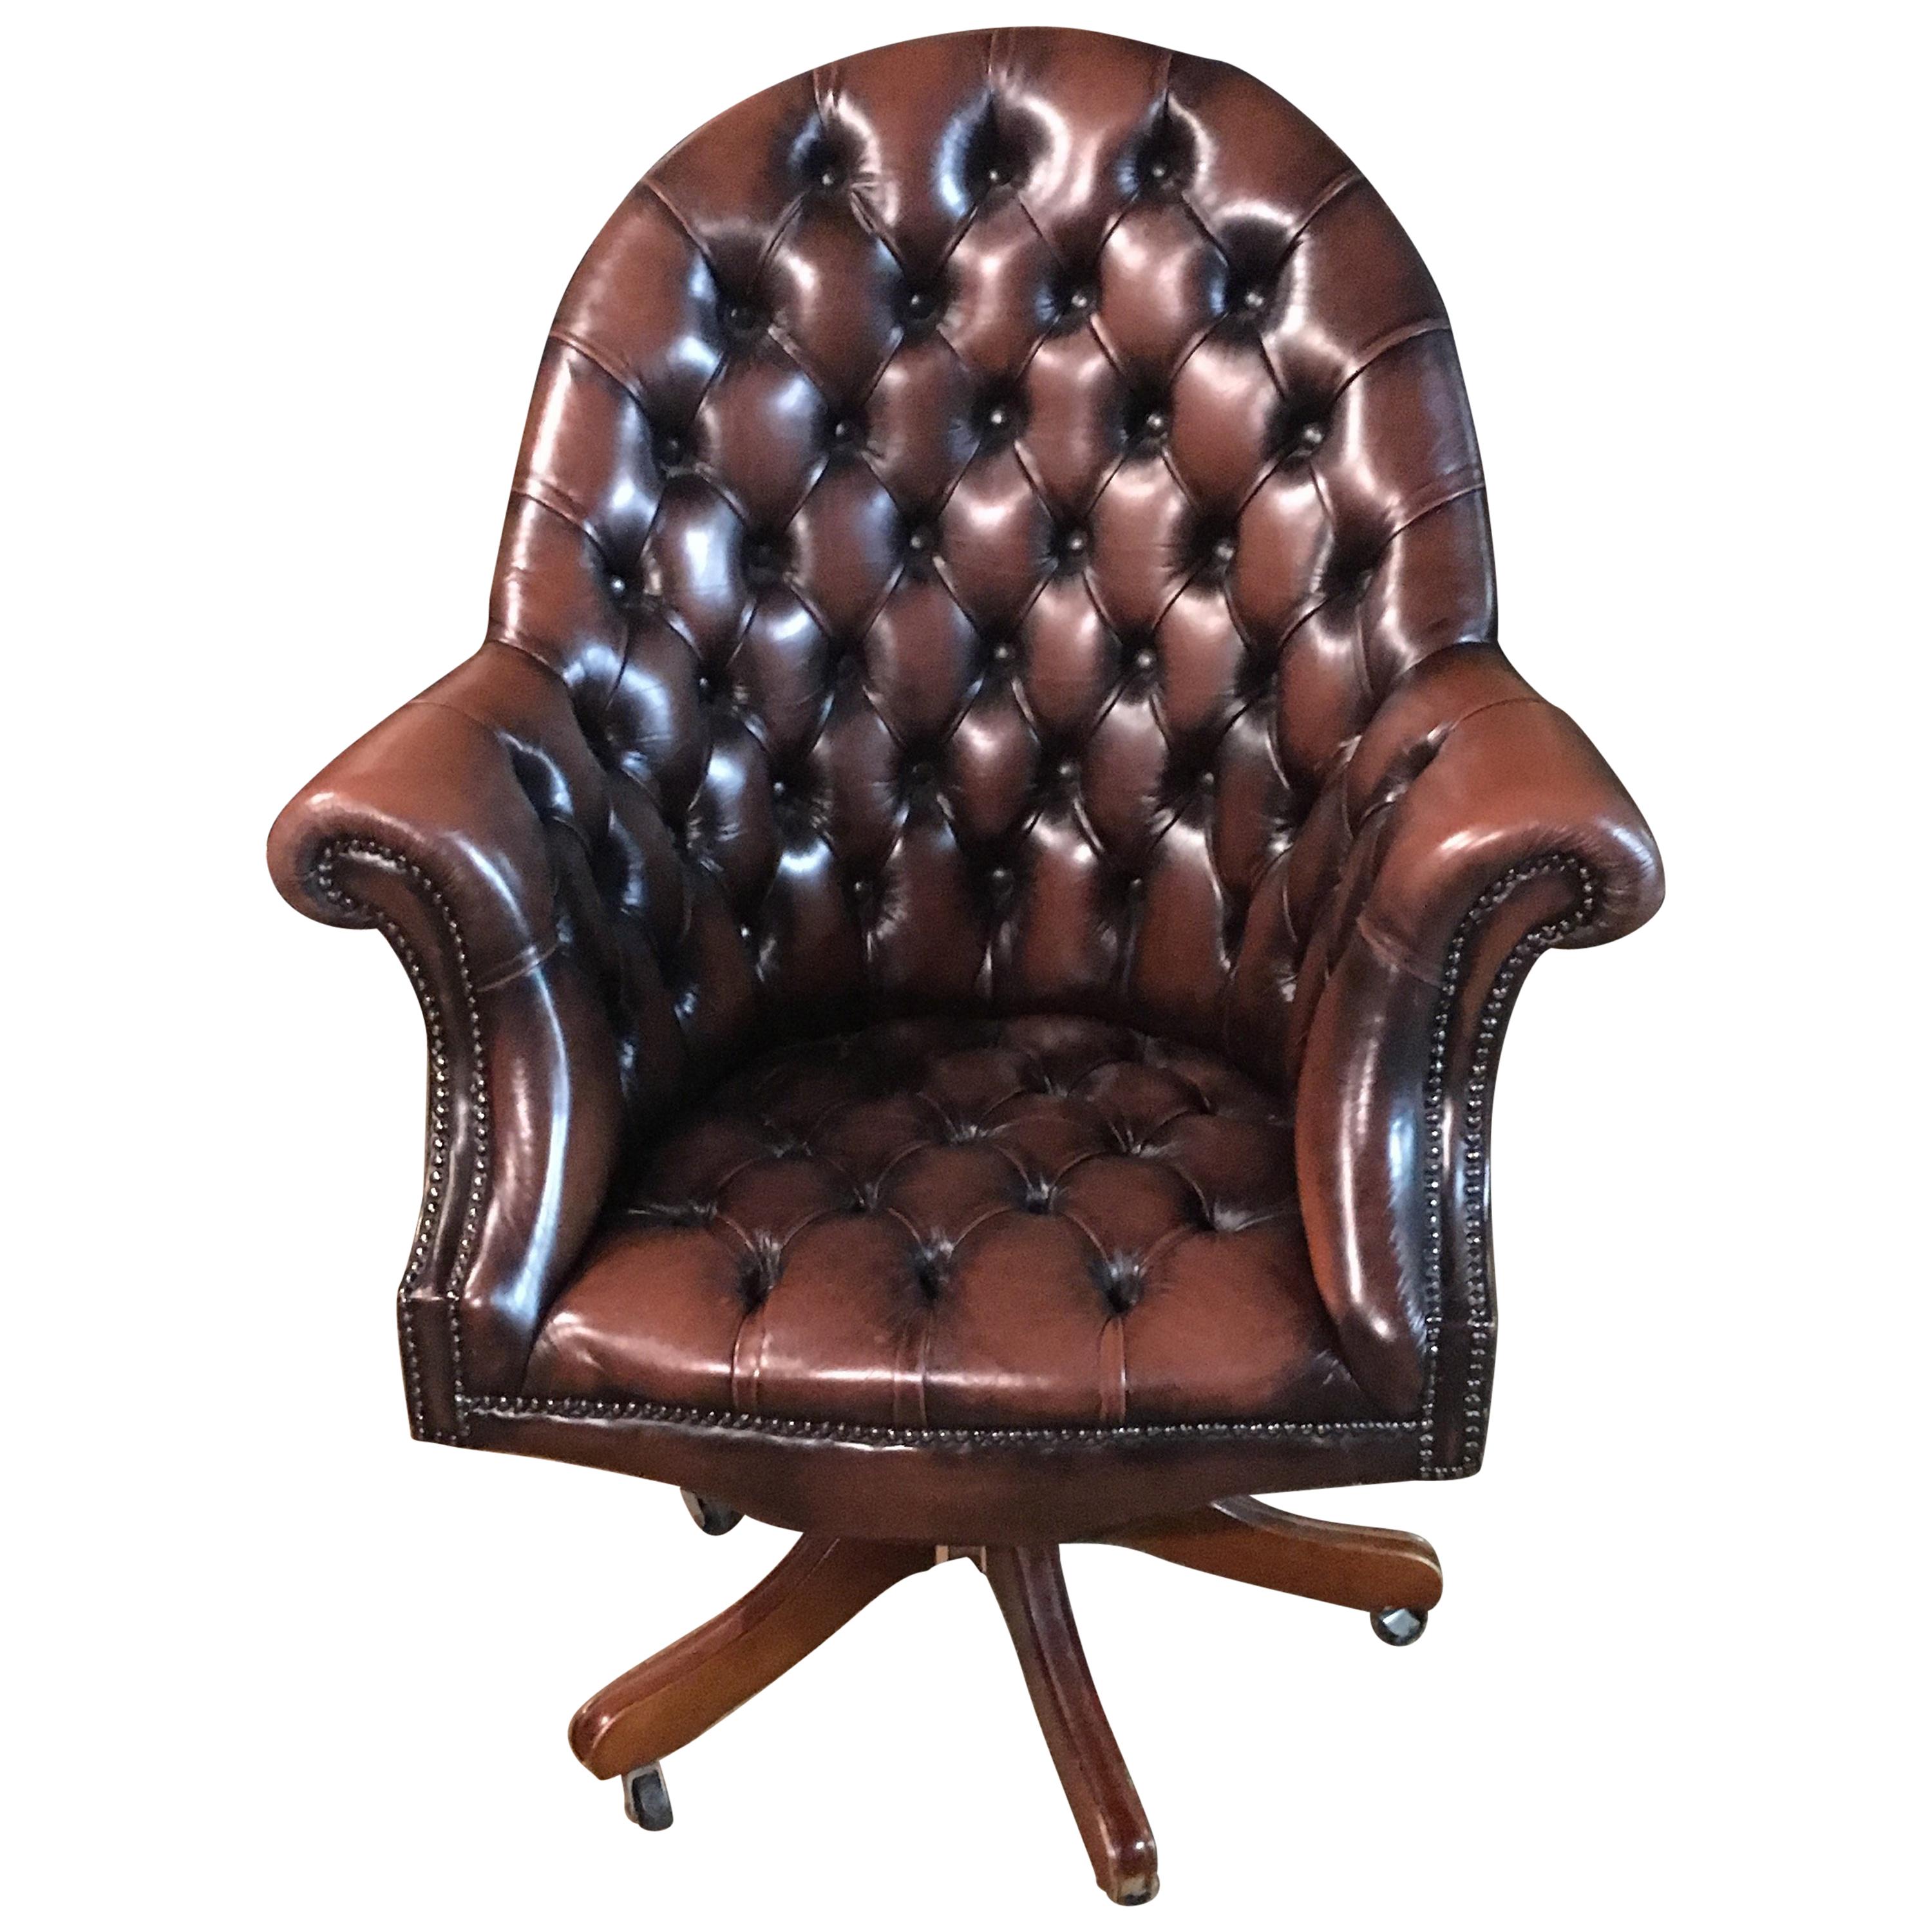 Original English Chesterfield Chair Full Leather Top Quality